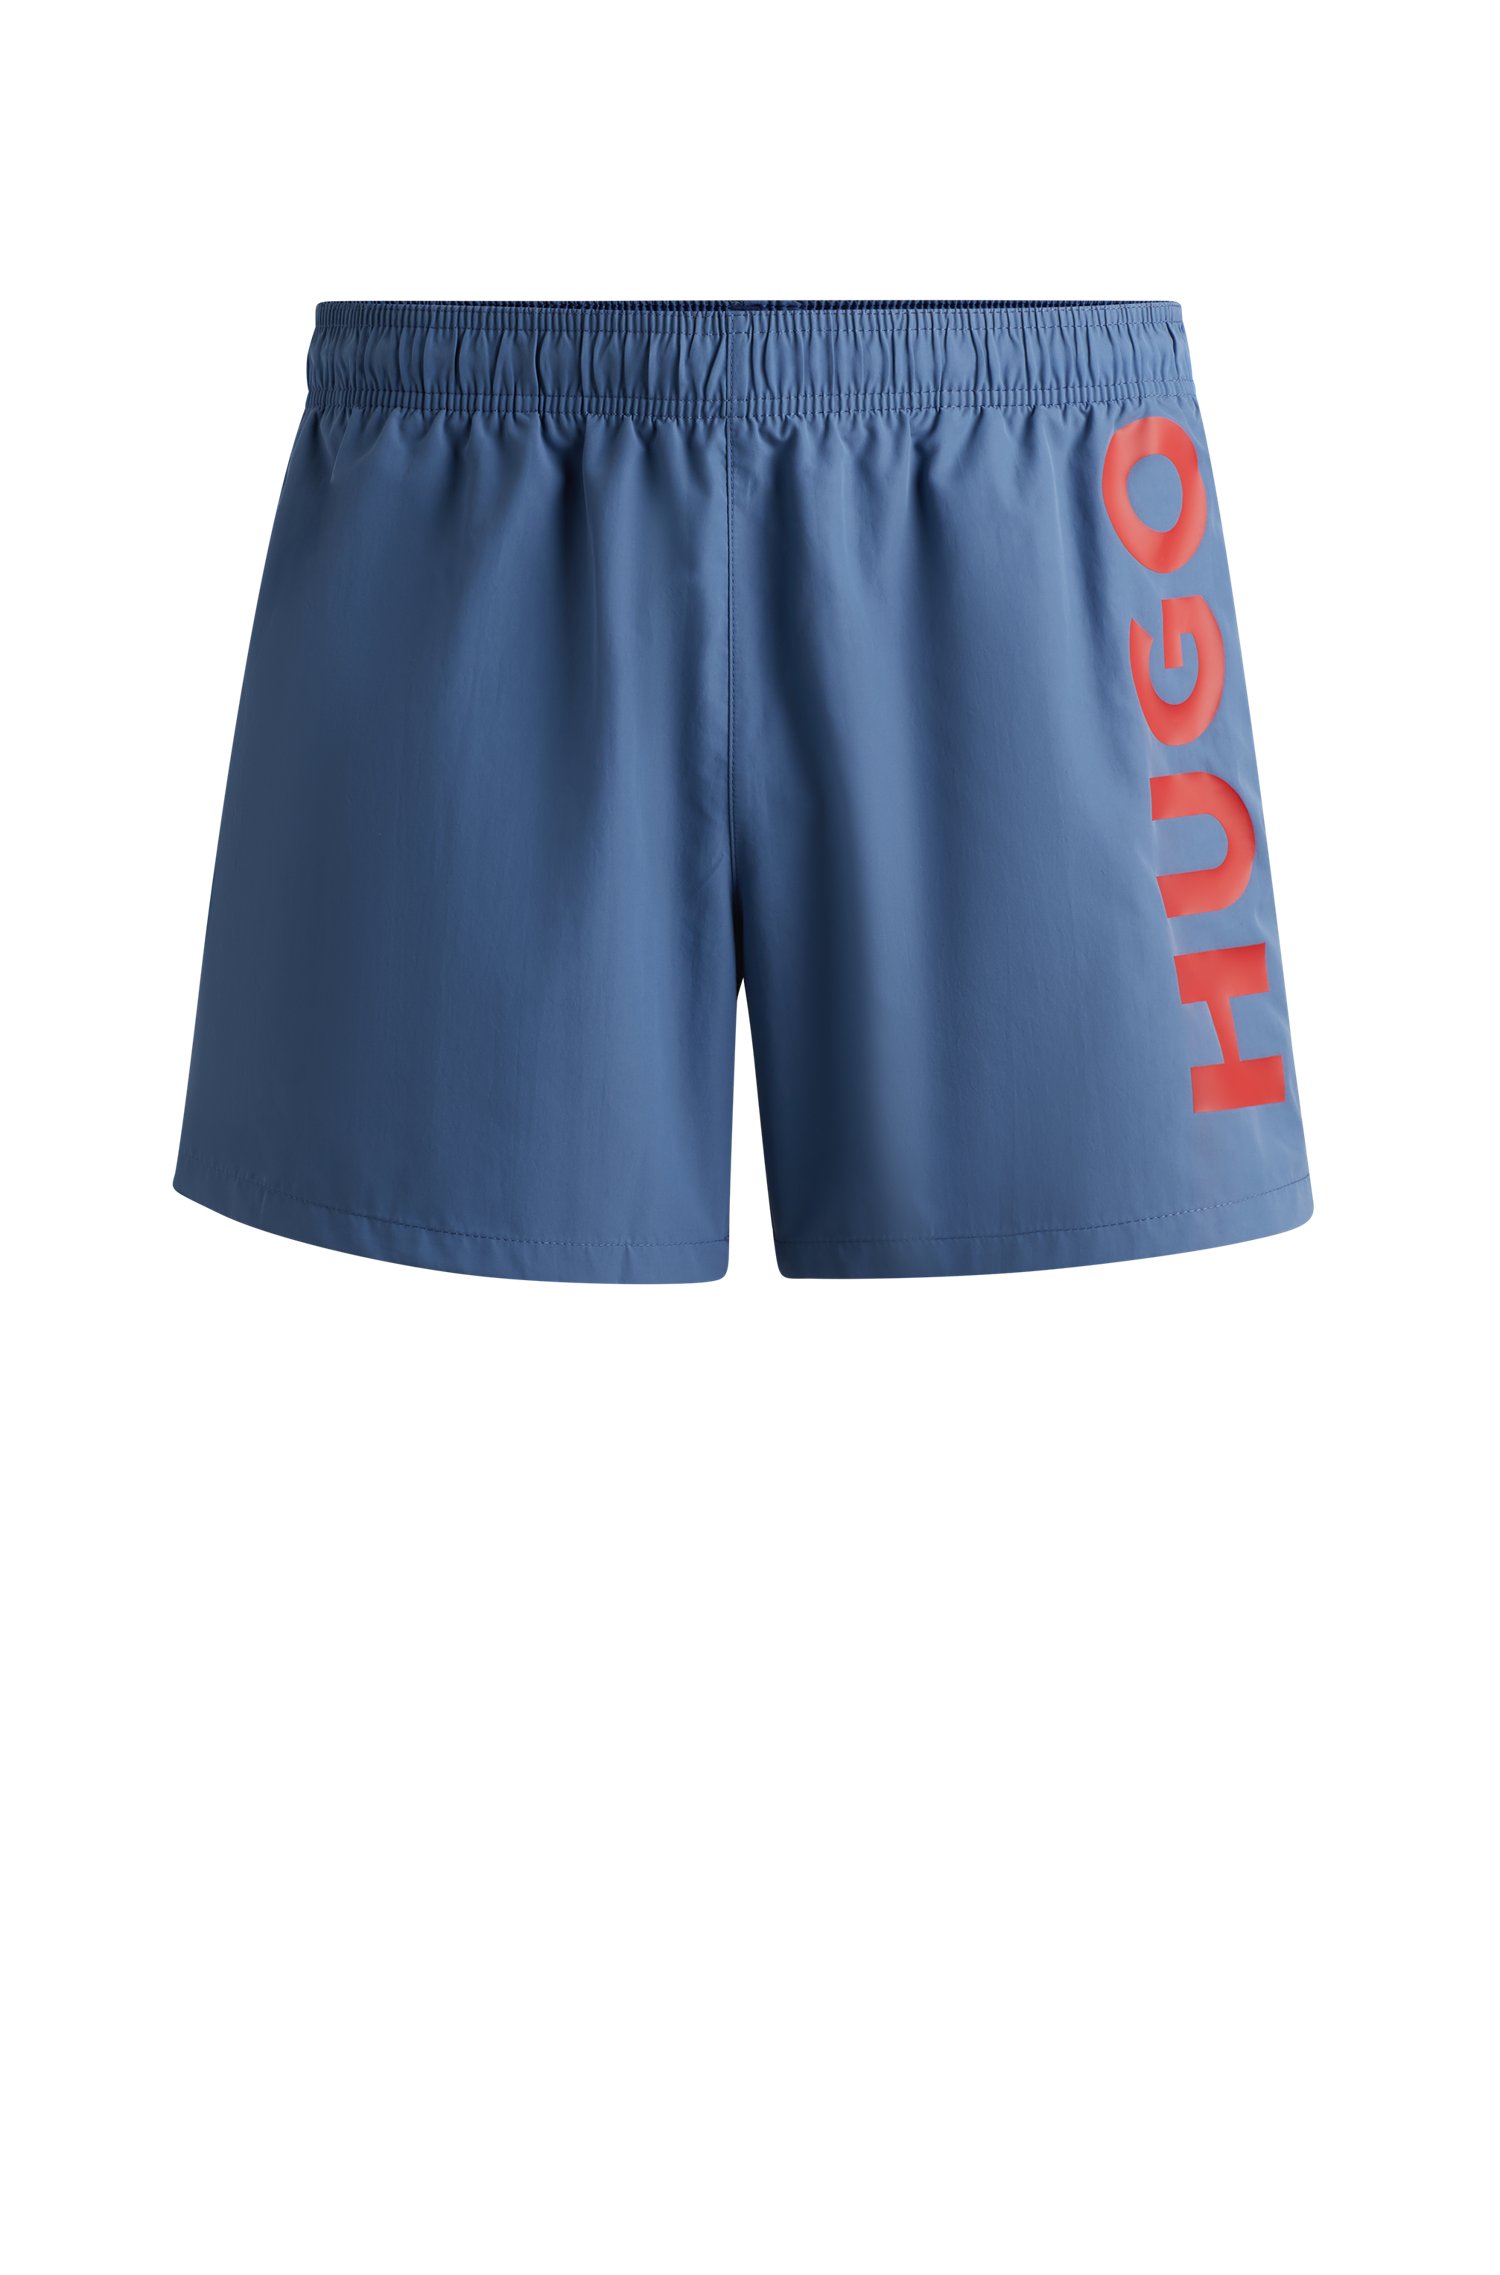 Fully lined swim shorts with vertical logo